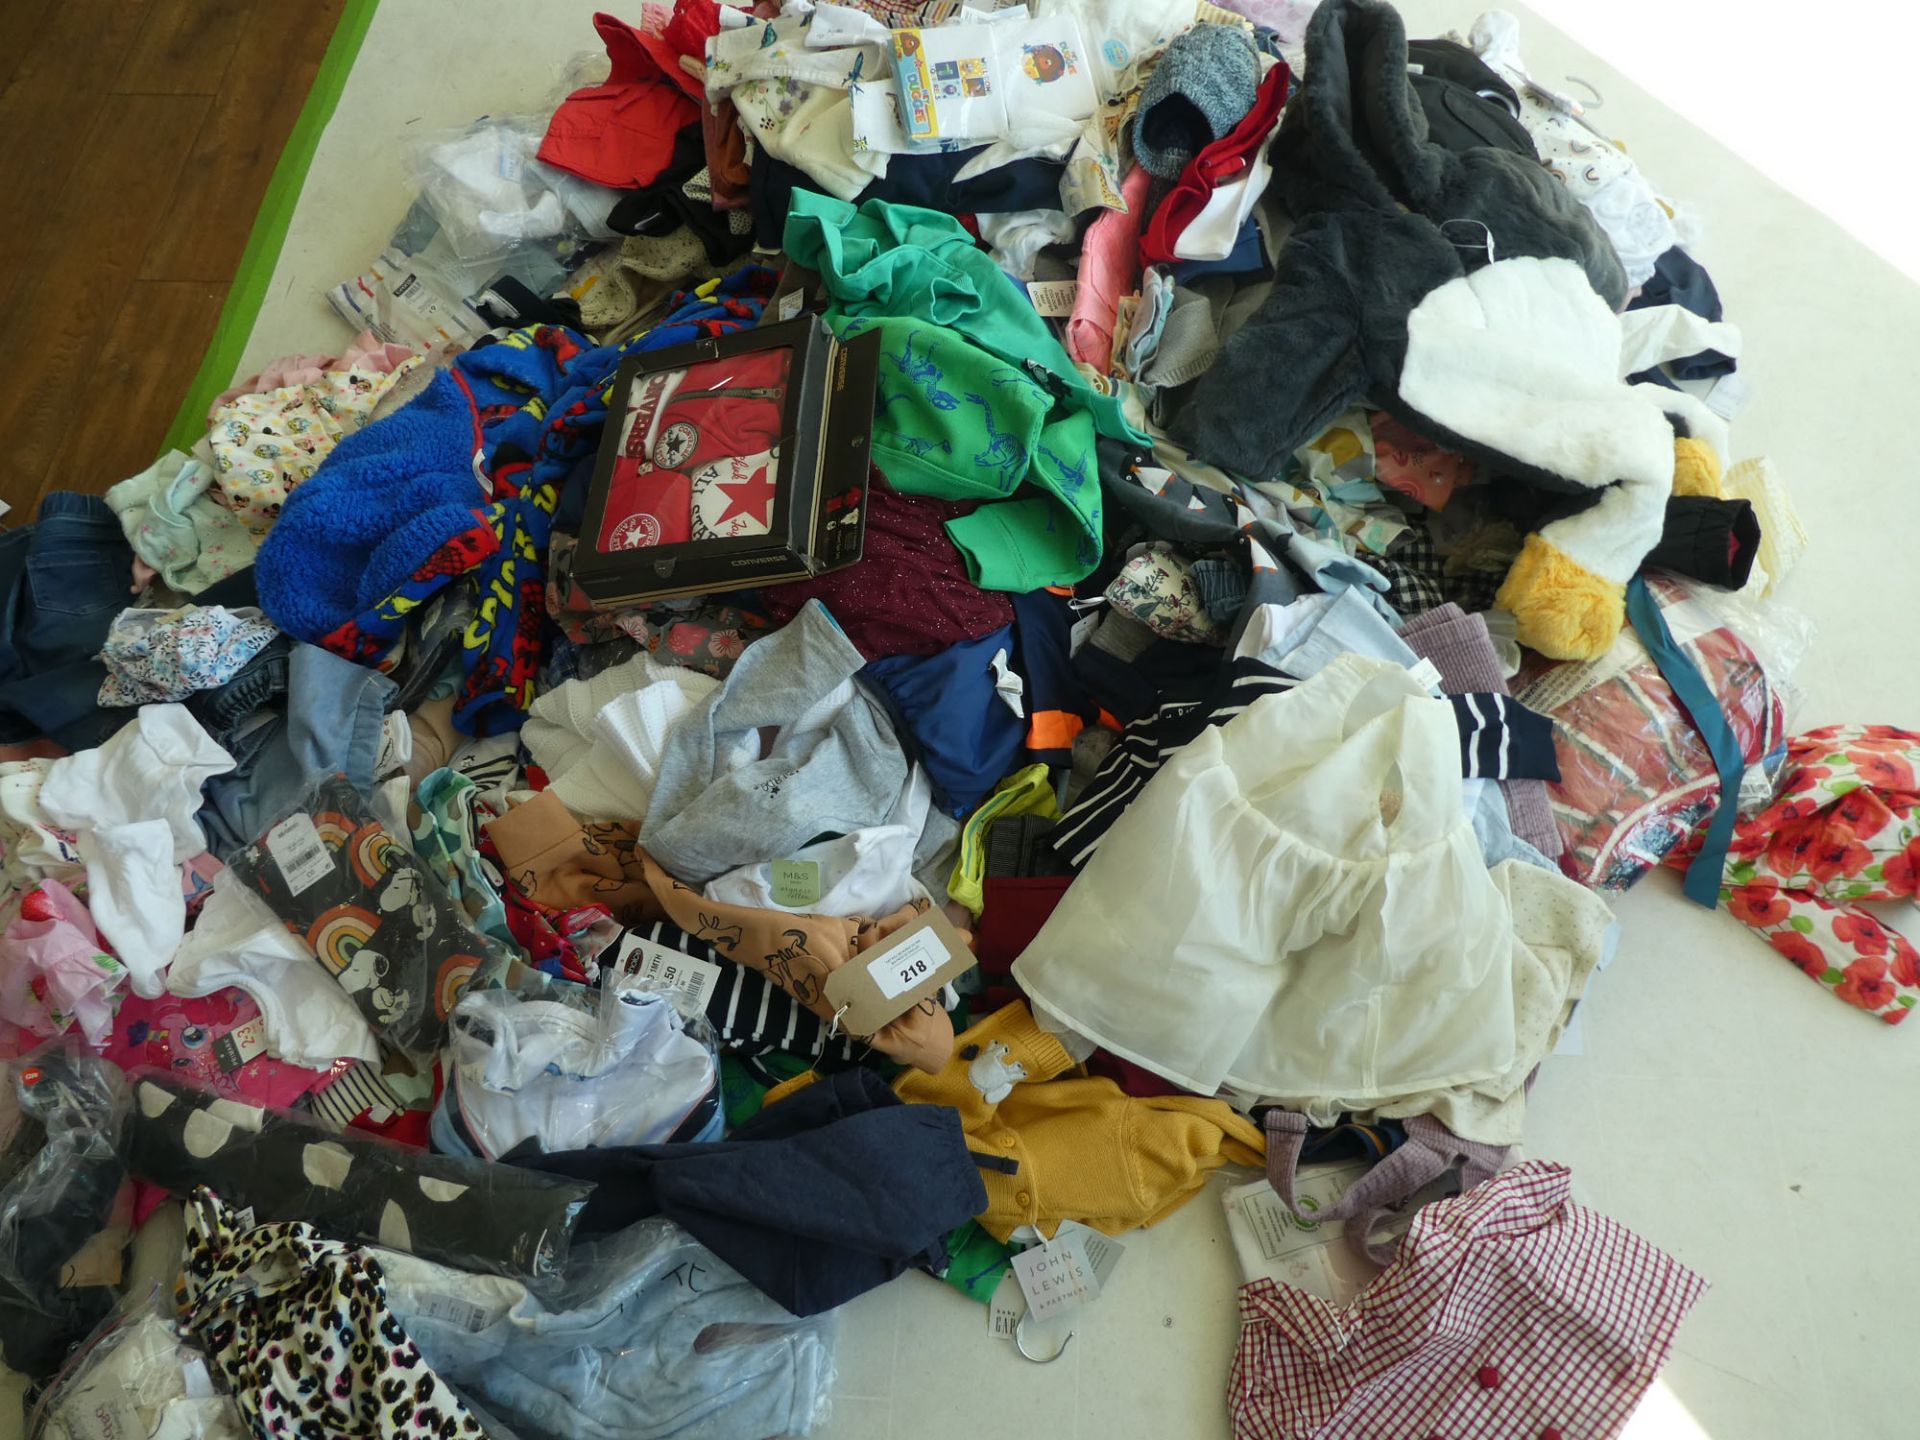 Half a stillage of children's clothing (under 4 years old) - approximately 295 items